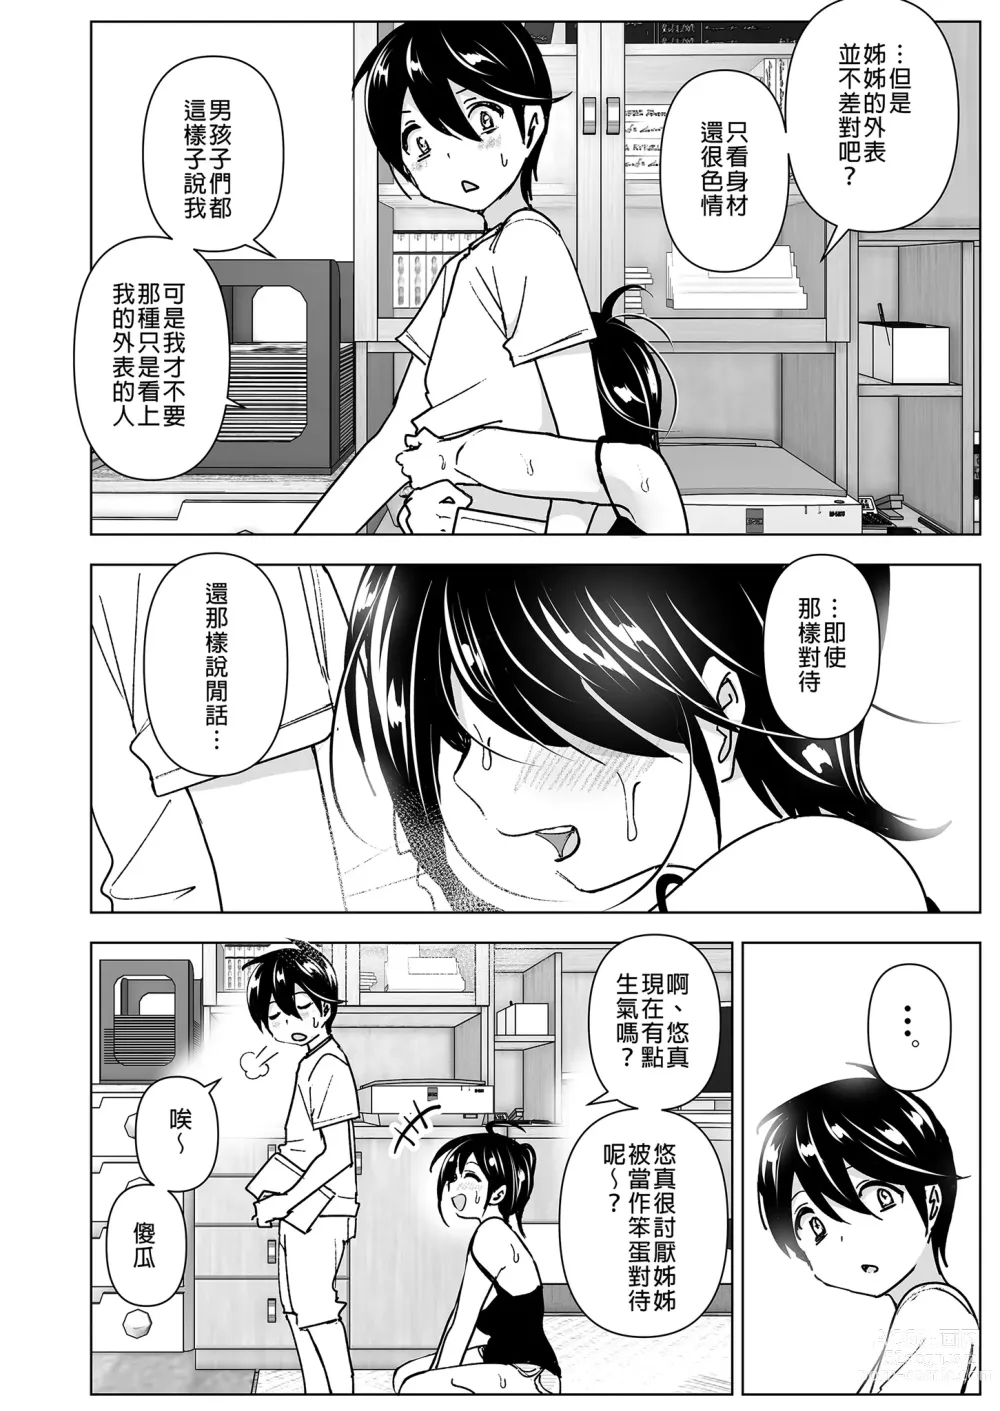 Page 8 of doujinshi 姊姊與傾聽怨言的弟弟